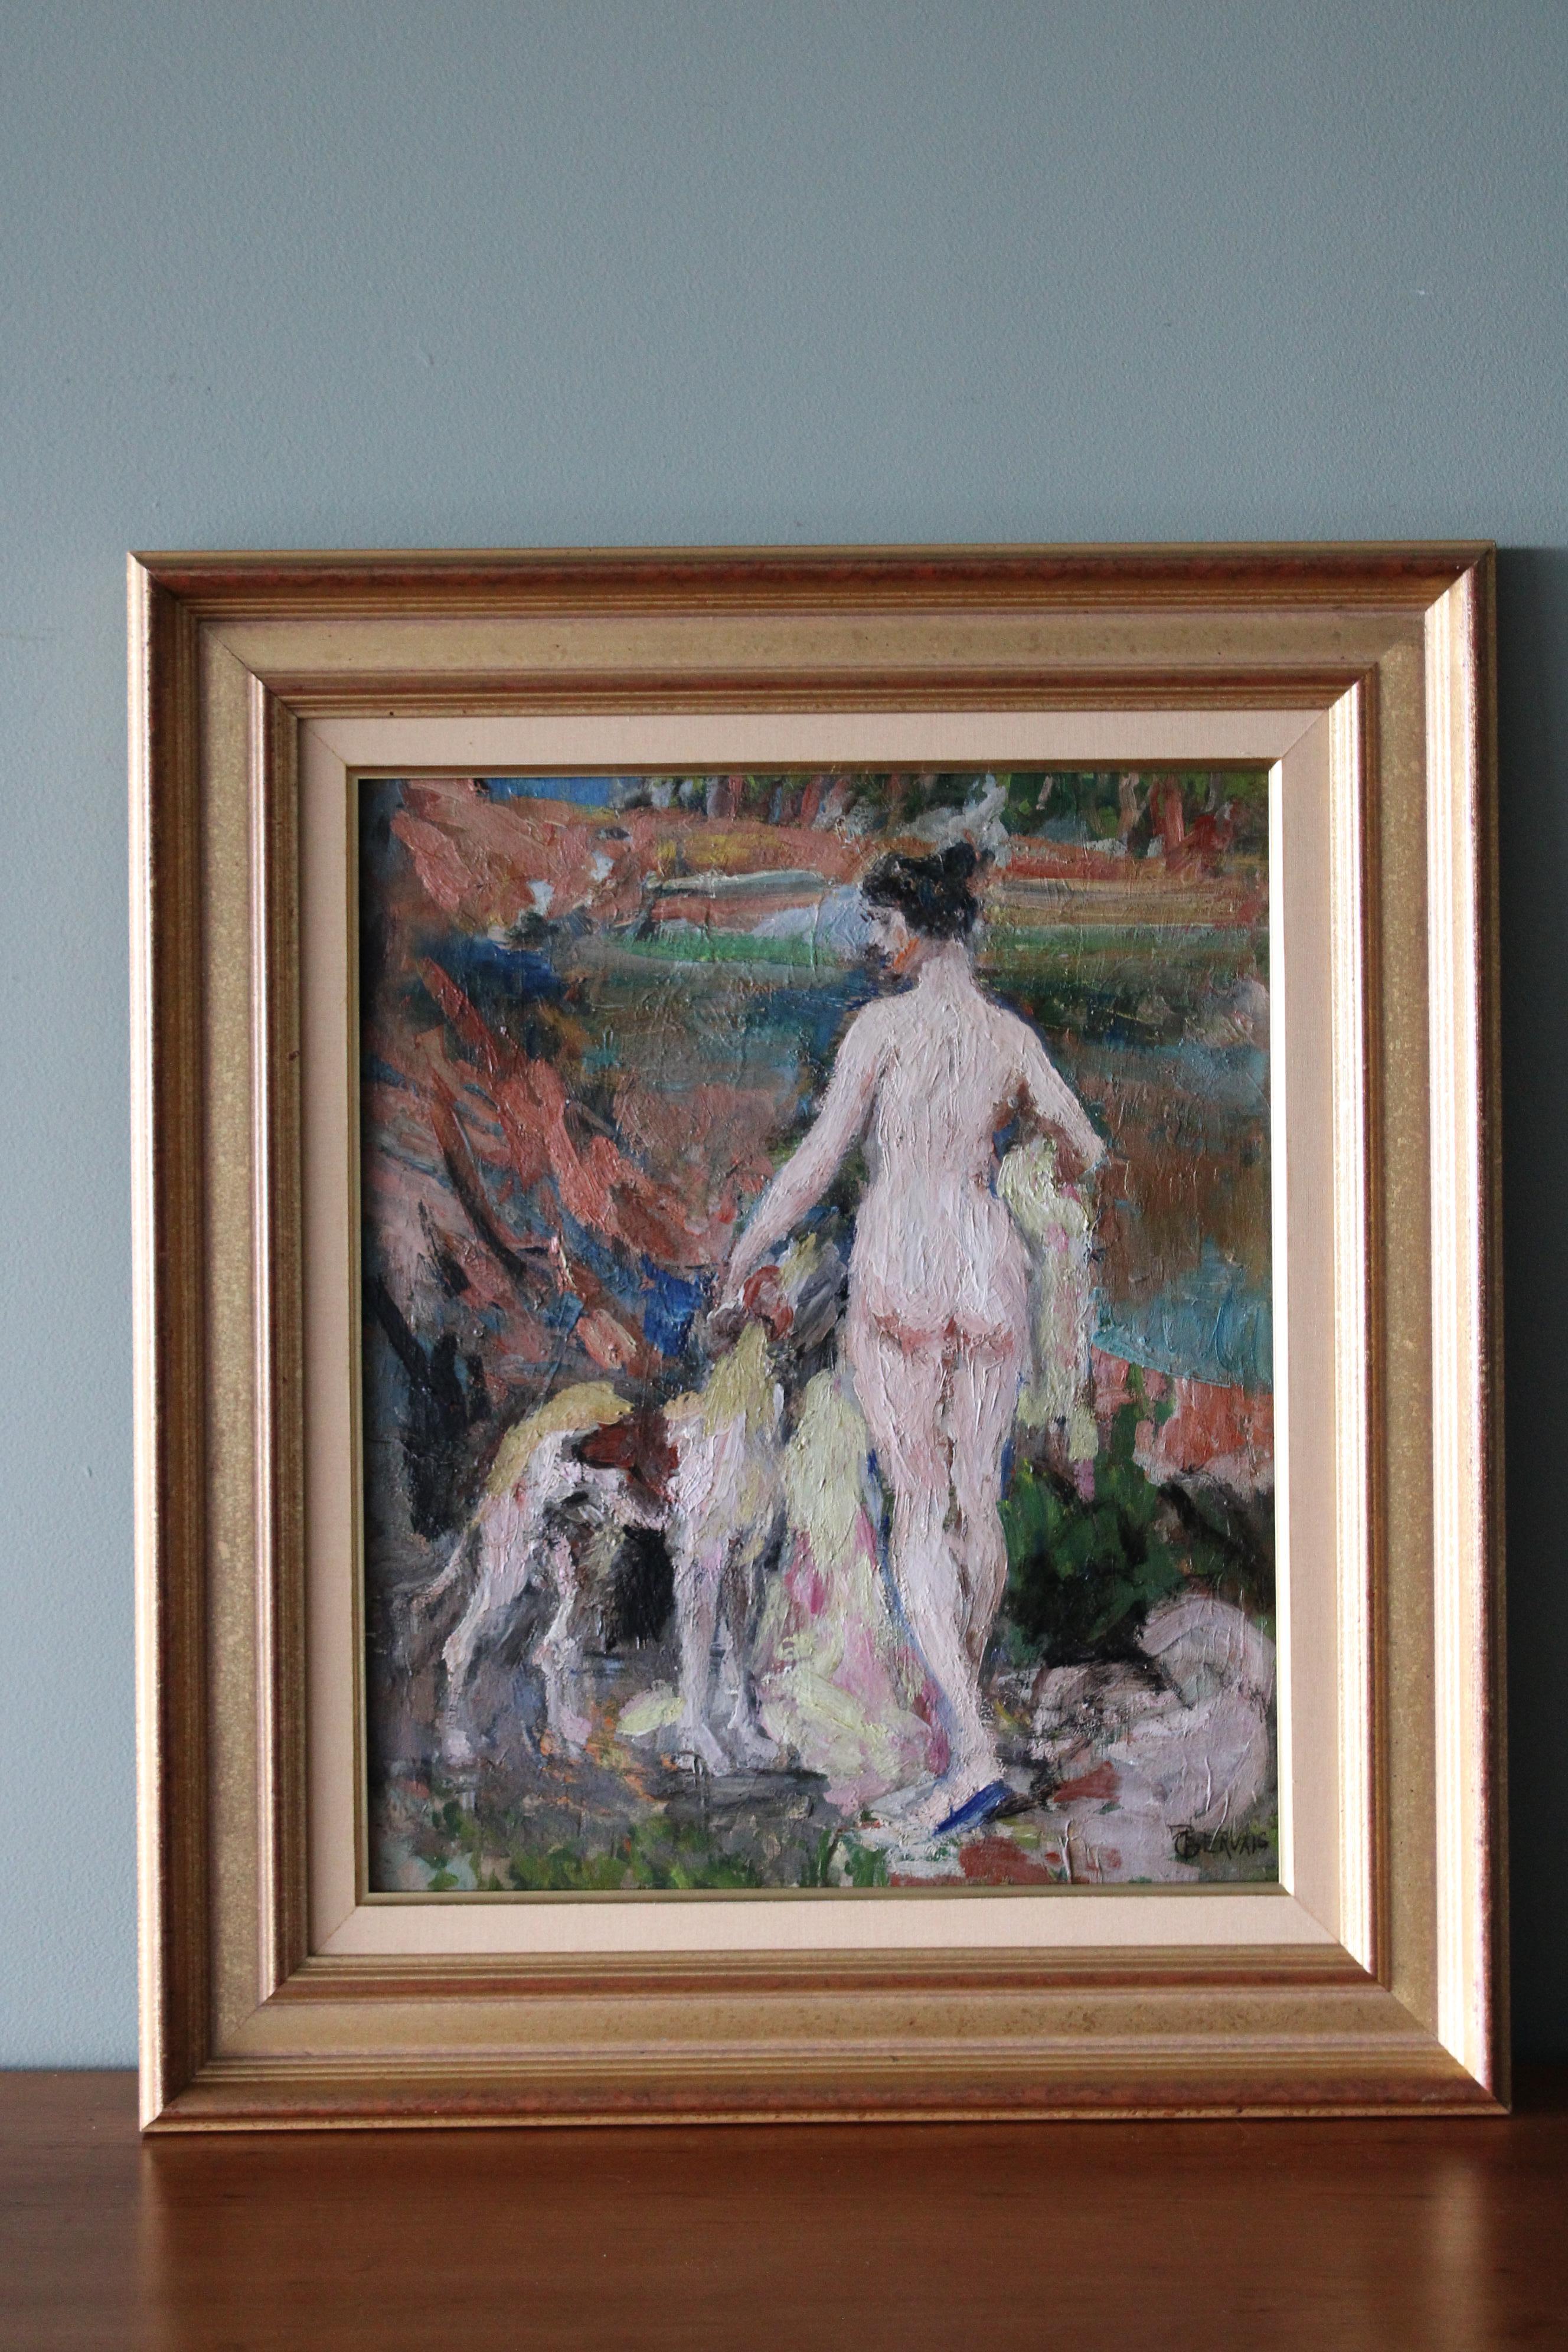 Antique nude portrait painting of a woman and her dog by French artist Paul Jean Gervais (1859-1944), signed in the lower right corner.  A very appealing impressionist oil painting on wood board with plenty of elevated texture to the touch with